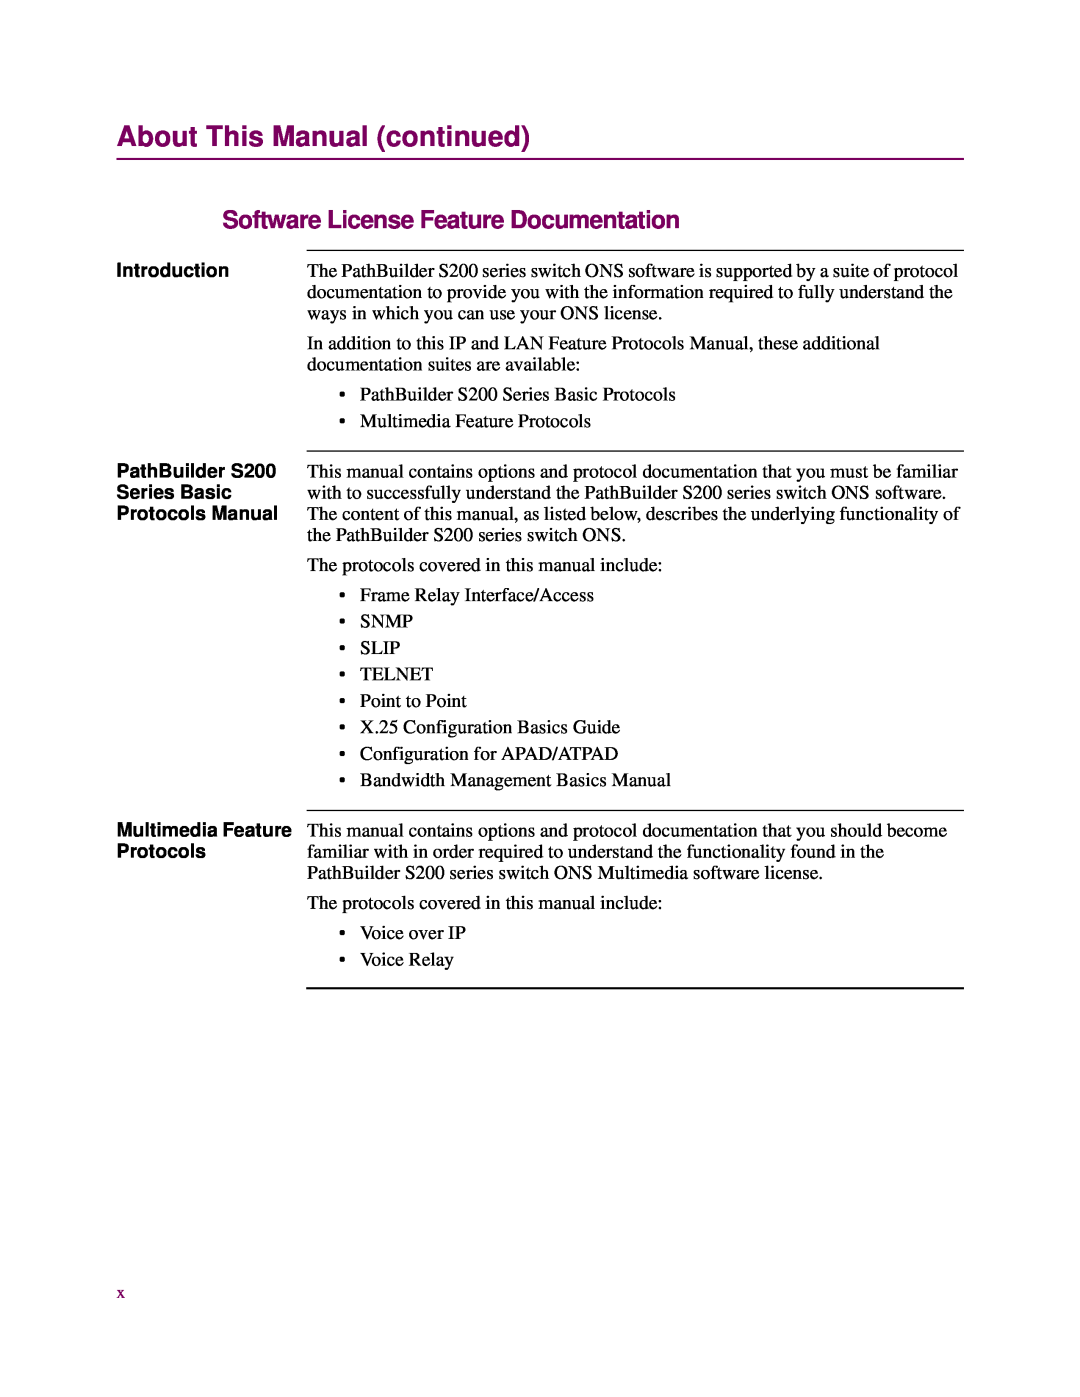 3Com S200 Series Software License Feature Documentation, PathBuilder S200, Series Basic, Protocols Manual, Introduction 